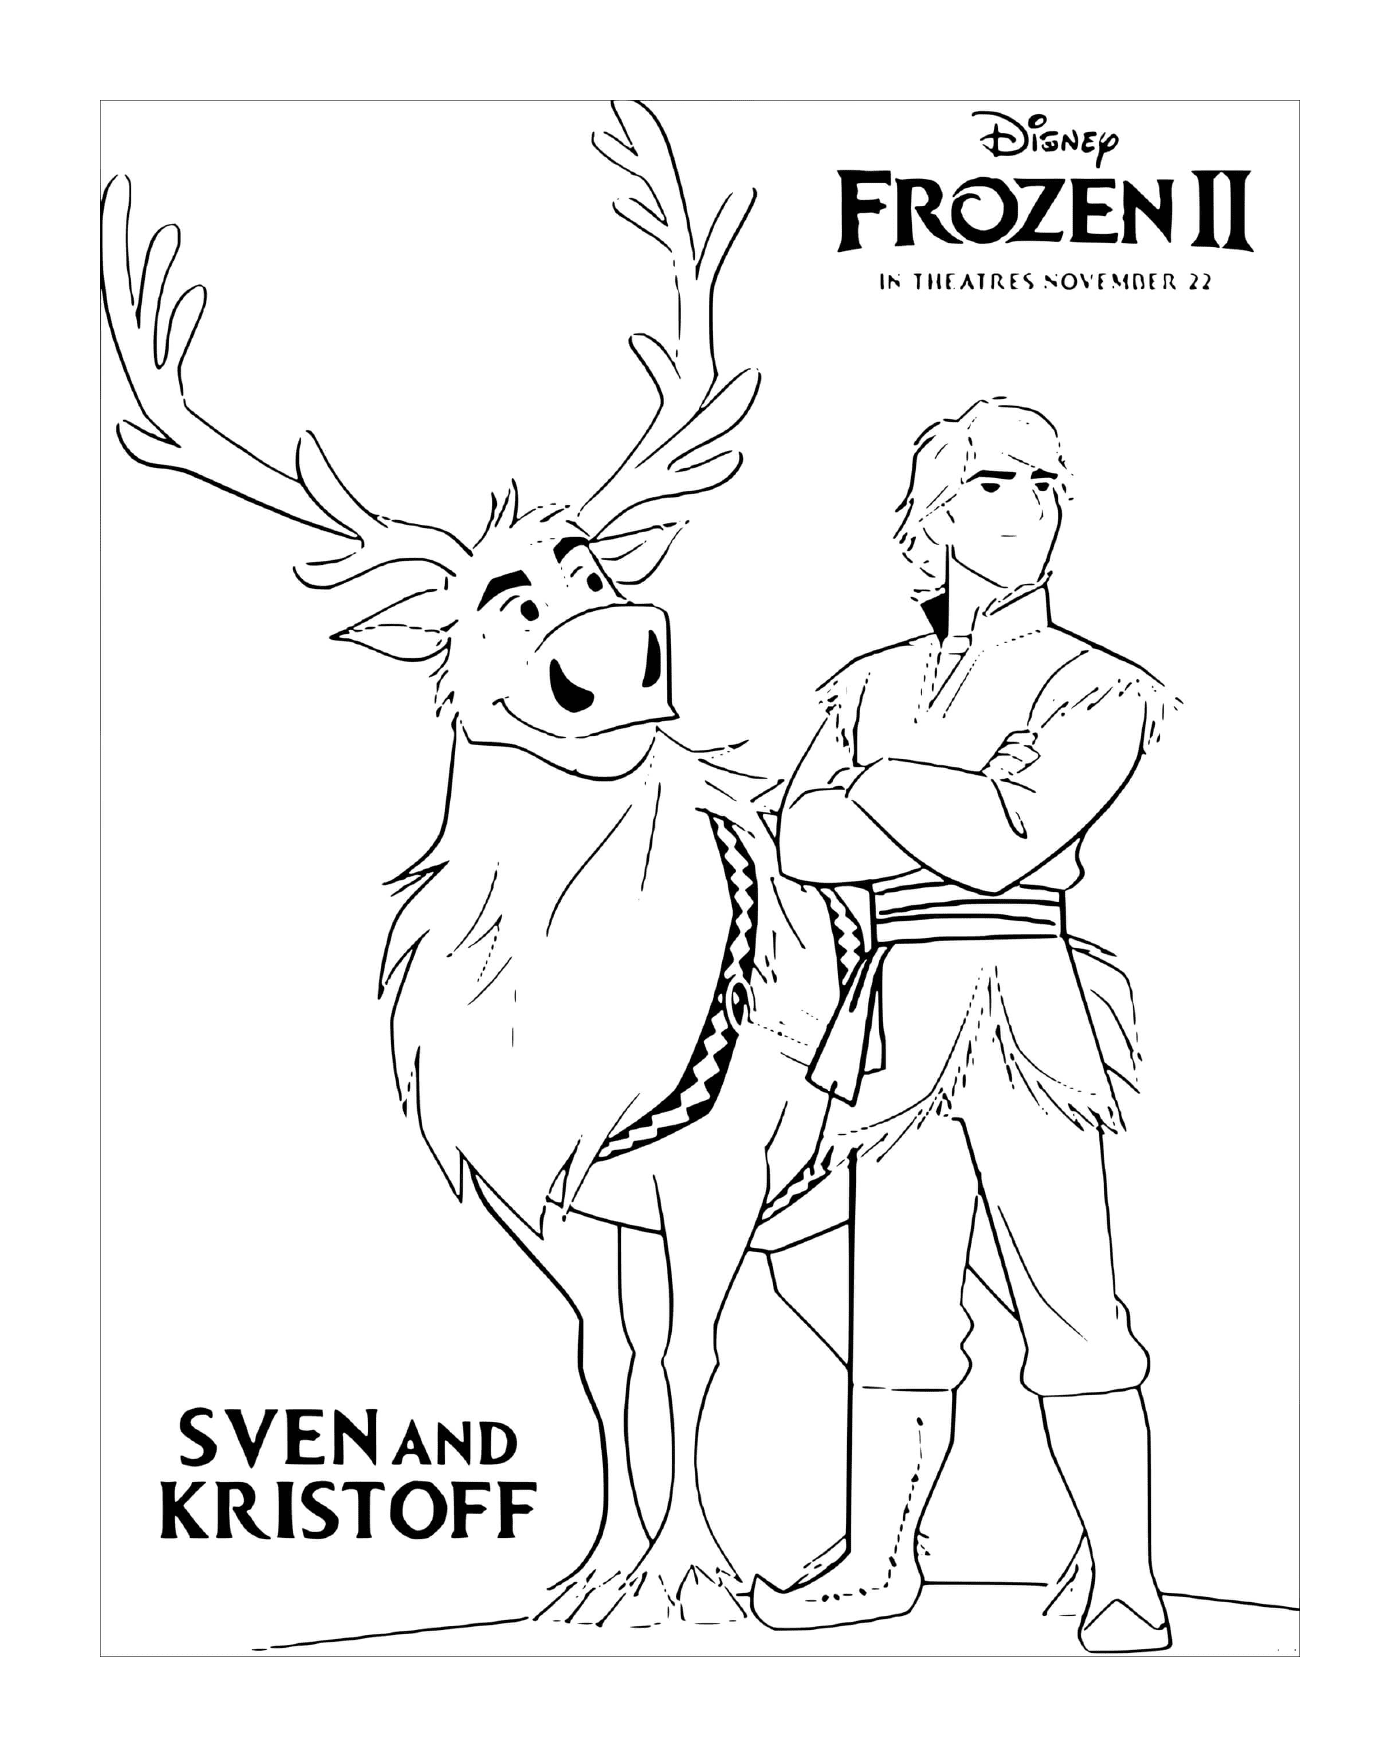  Sven and Kristoff are looking for Elsa 